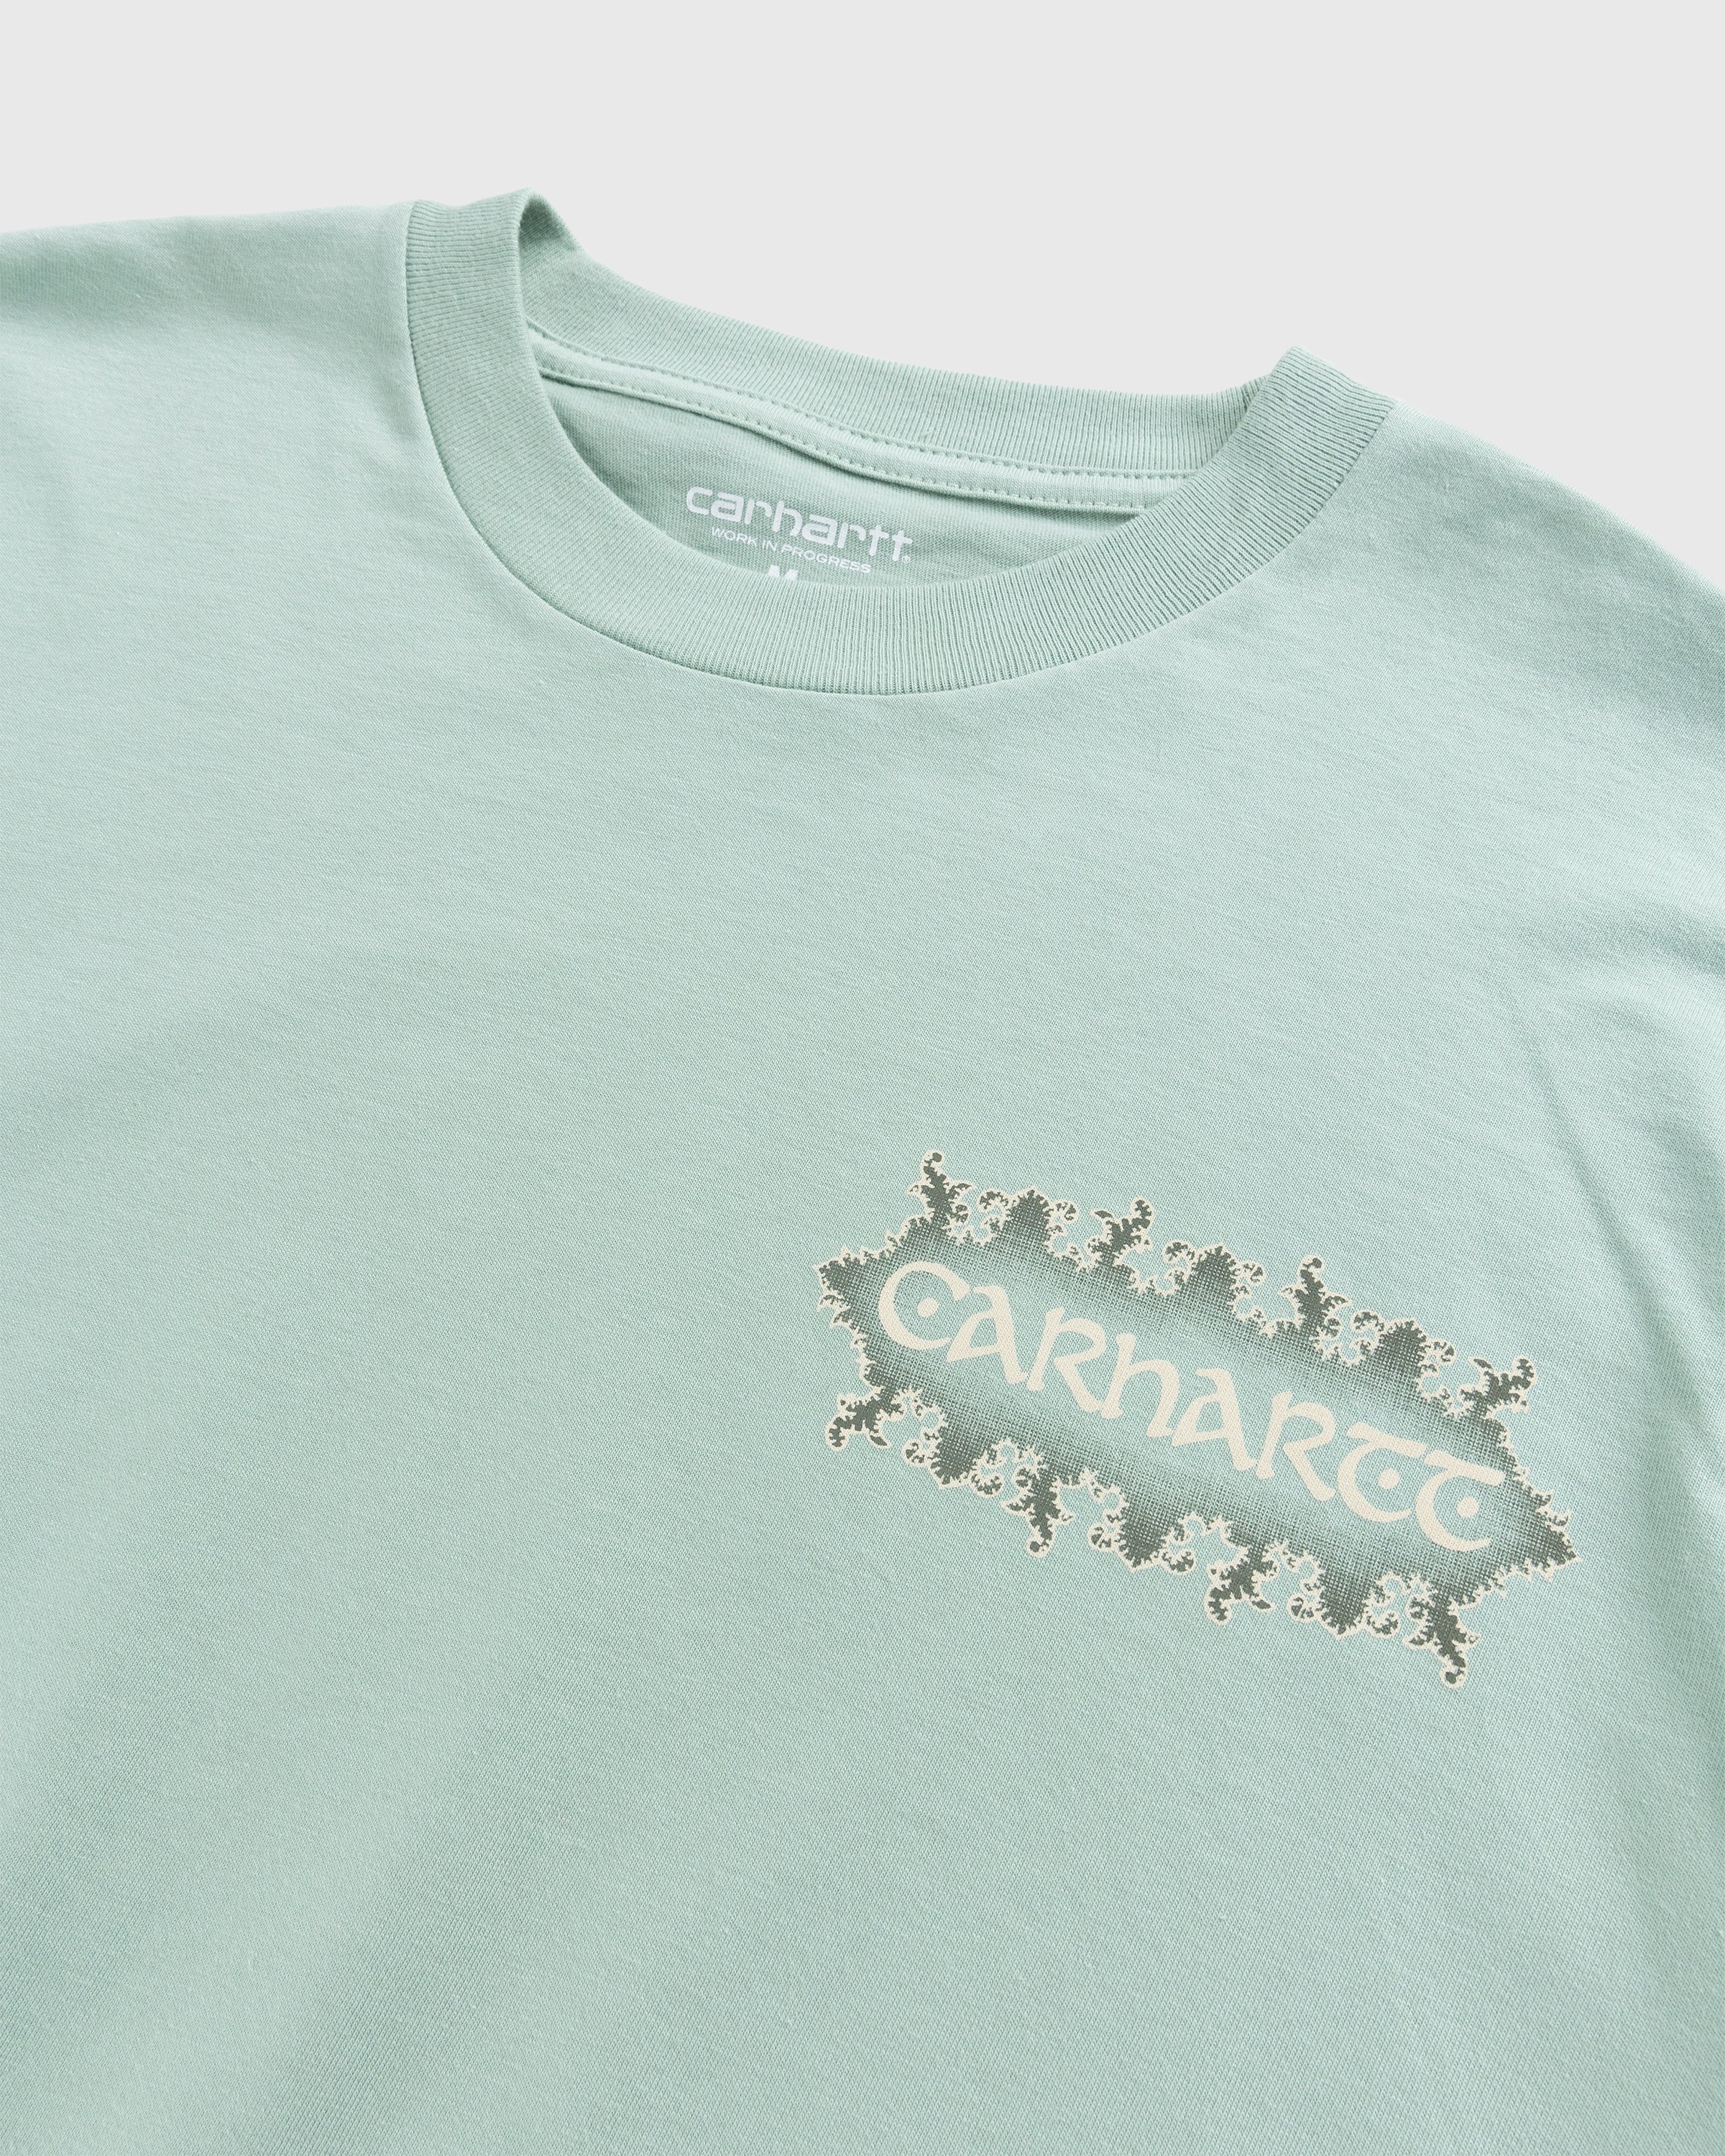 Carhartt WIP - Spaces T-Shirt Misty Sage - Clothing - Green - Image 3